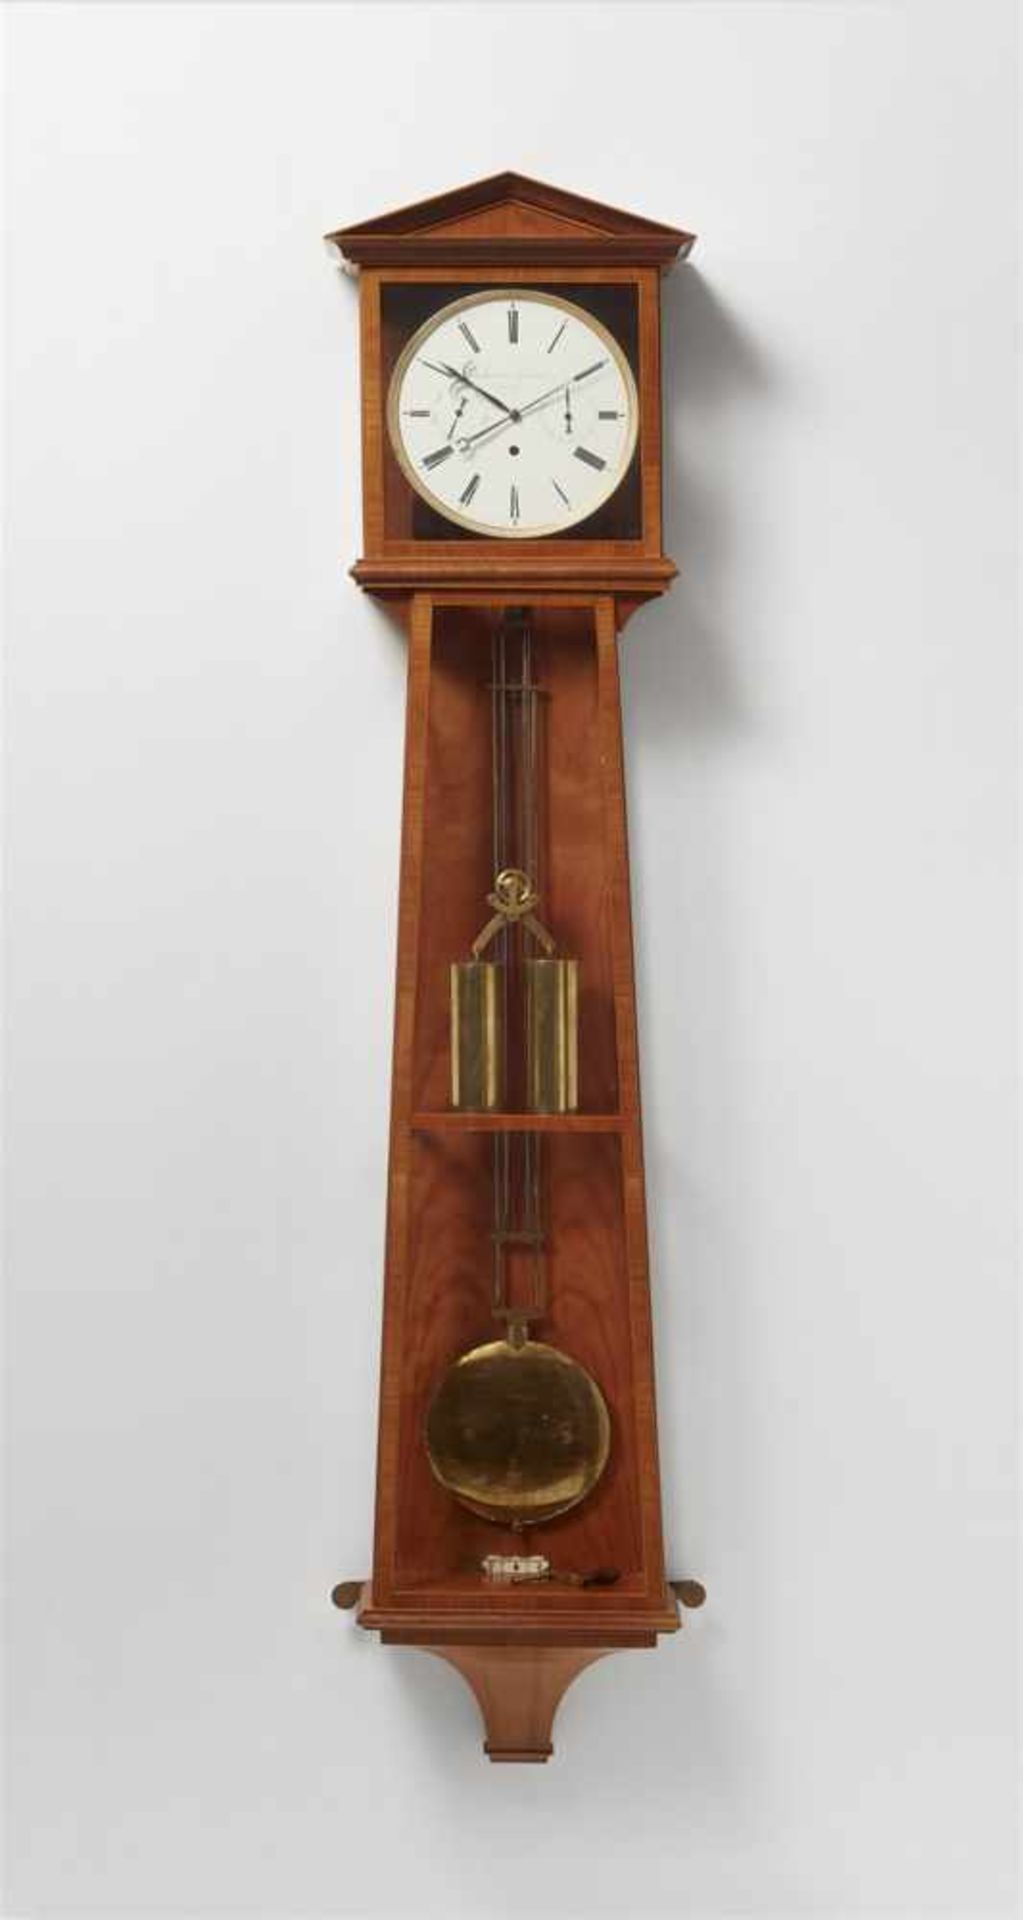 A rare Viennese wall clockCherry and boxwood veneer on softwood, glazing, white enamel dial with